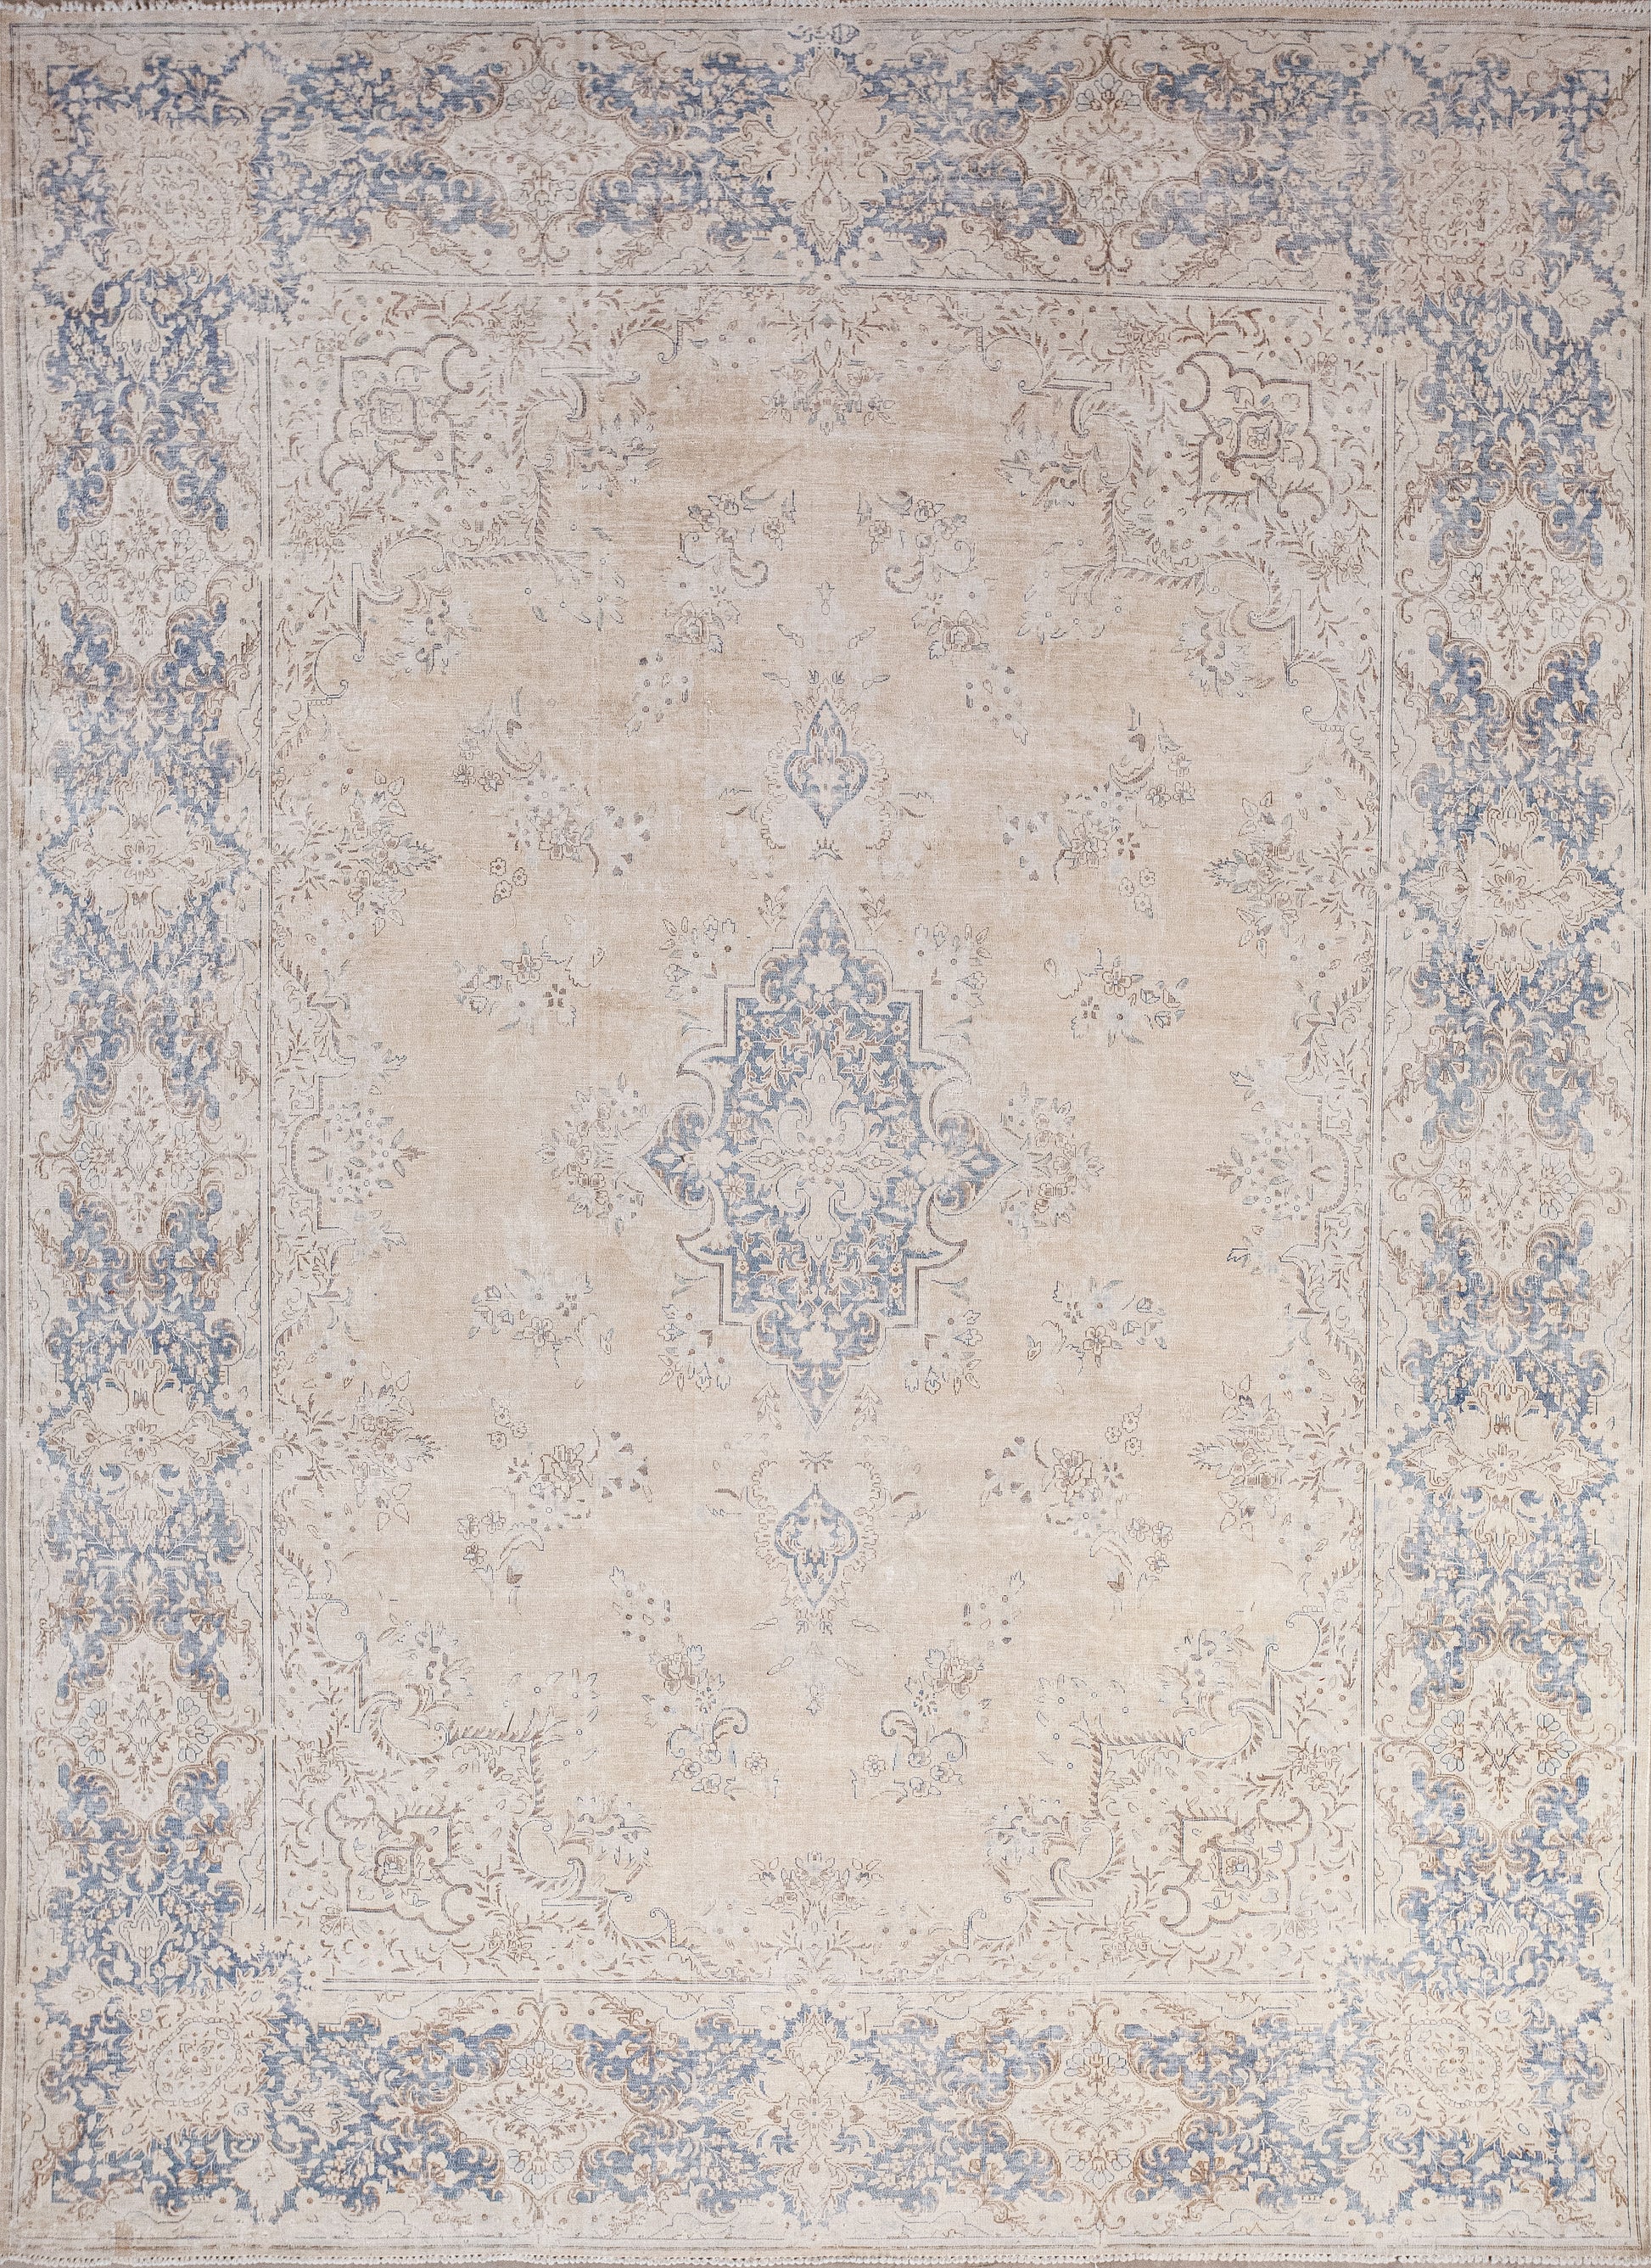 Stunning rug comes with inspiration from the space. The background was woven with cosmic latte, the margin with midnight blue, and earthy brown outlines.